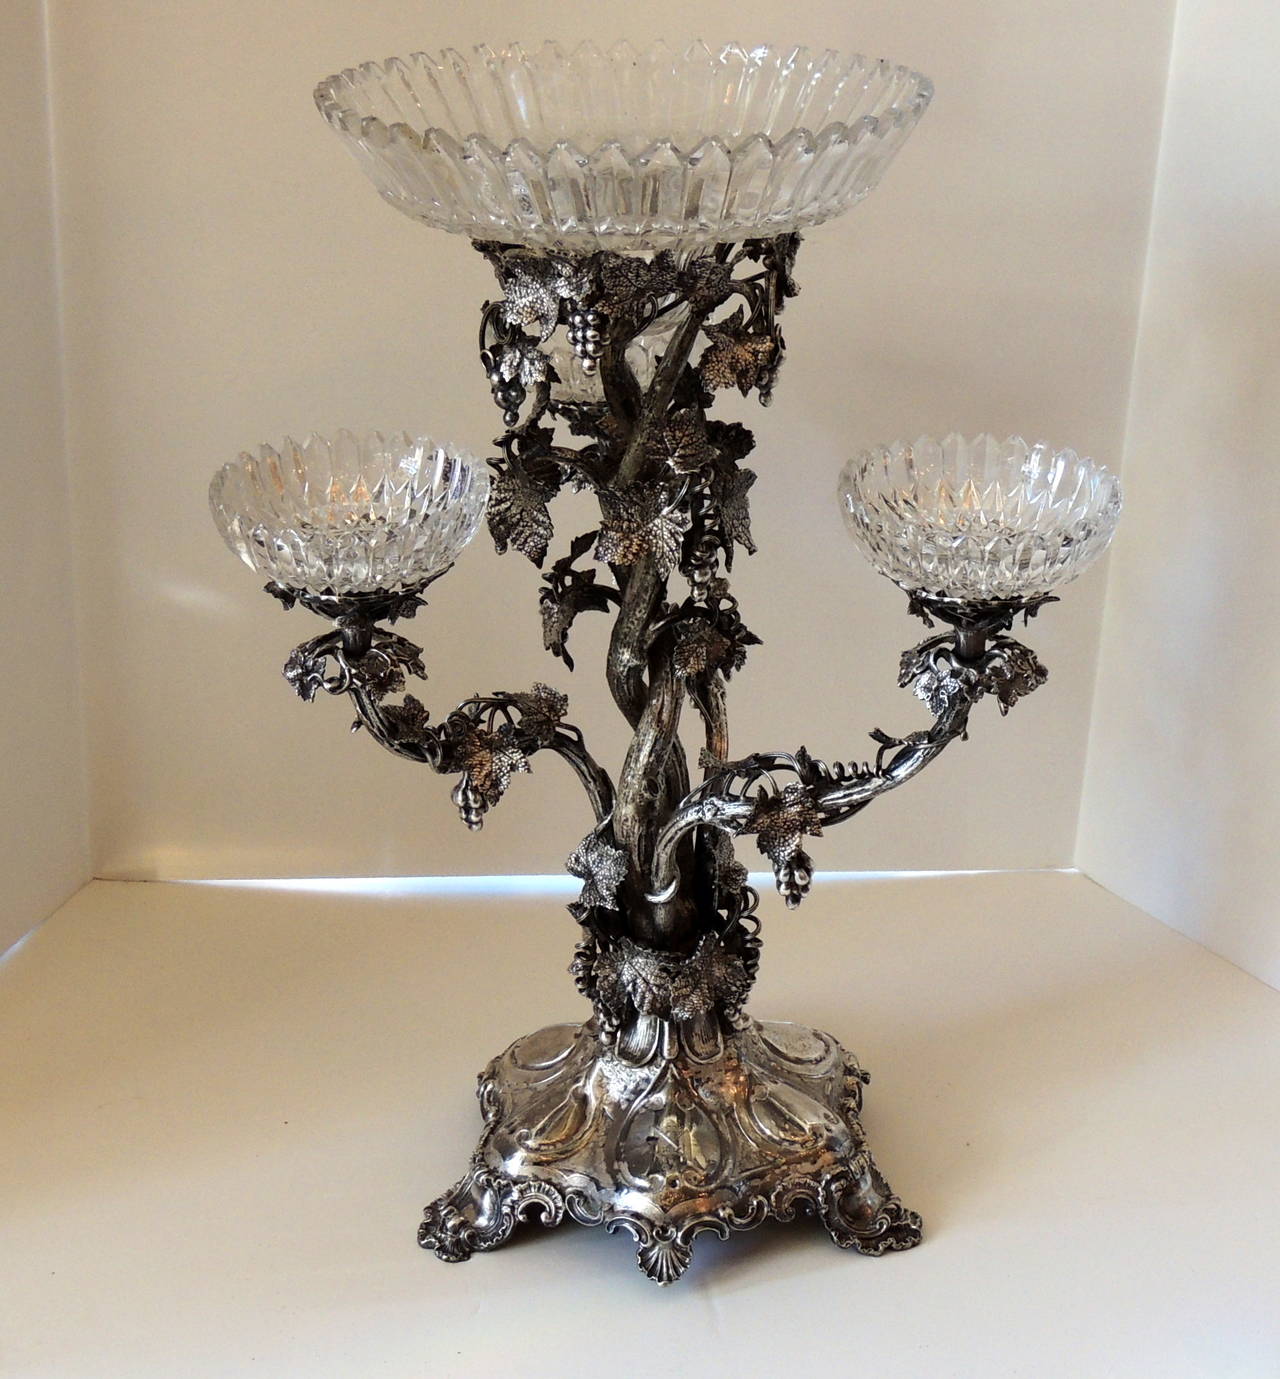 This wonderful silver plated epergne is shaped like branches of a tree with limbs holding the original crystal bowls. The main top cut crystal bowl is a generous 10